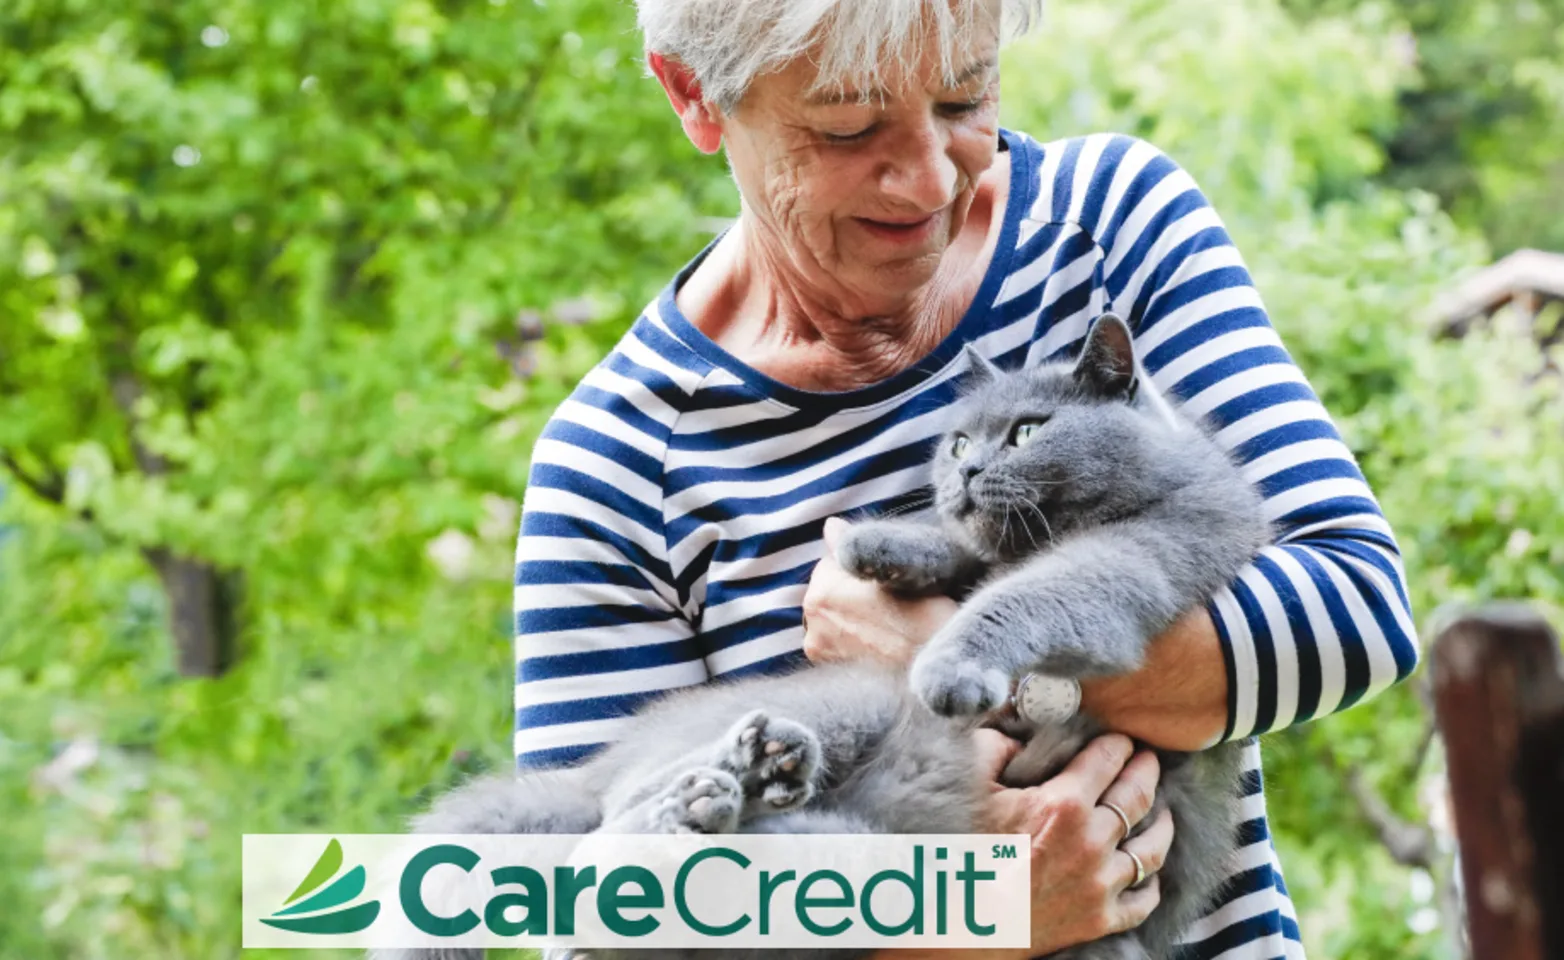 Old lady holding cat with the CareCredit logo